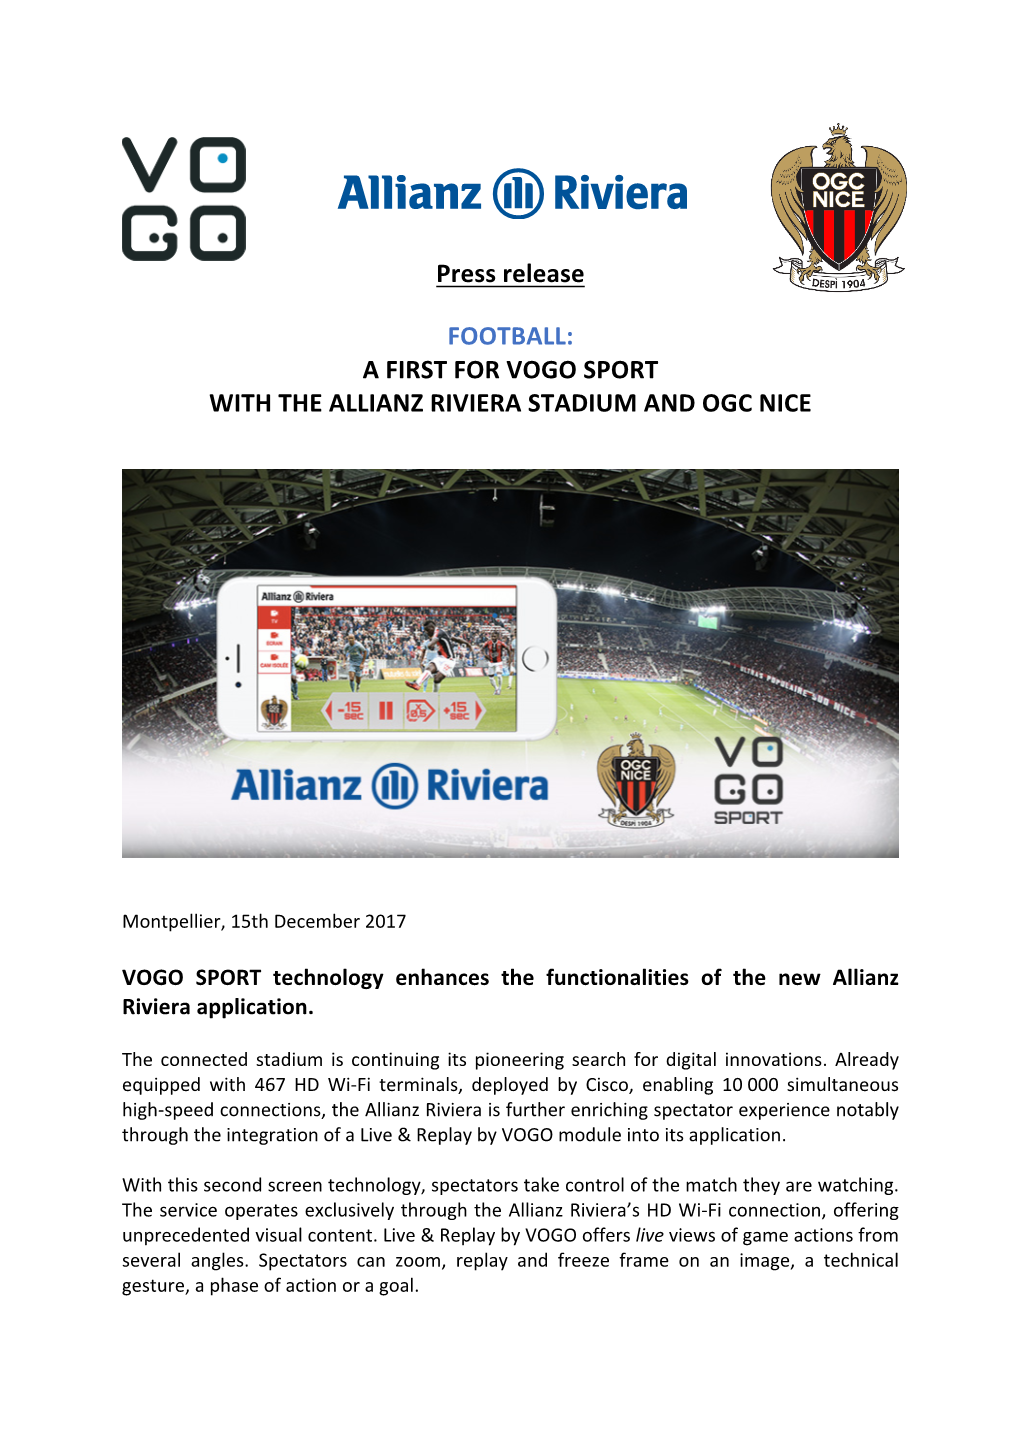 Press Release FOOTBALL: a FIRST for VOGO SPORT with THE